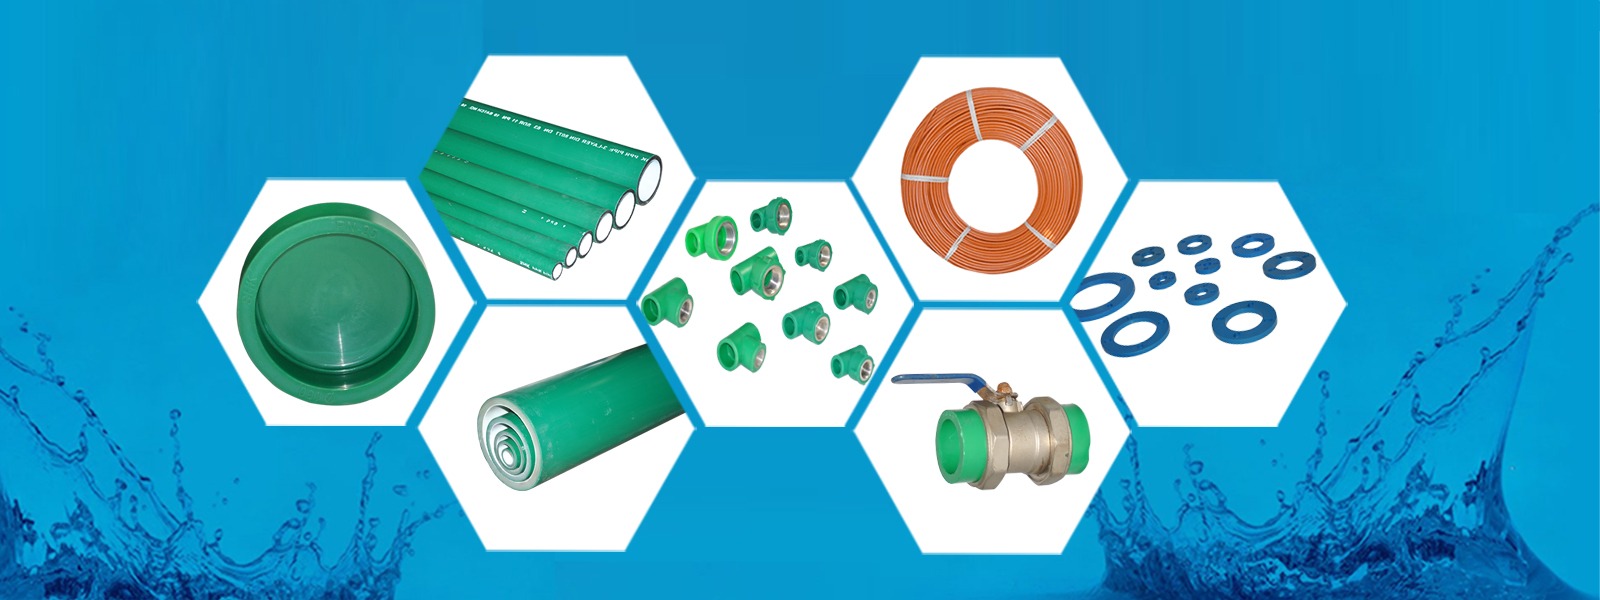 HDPE pipes and fittings supplier